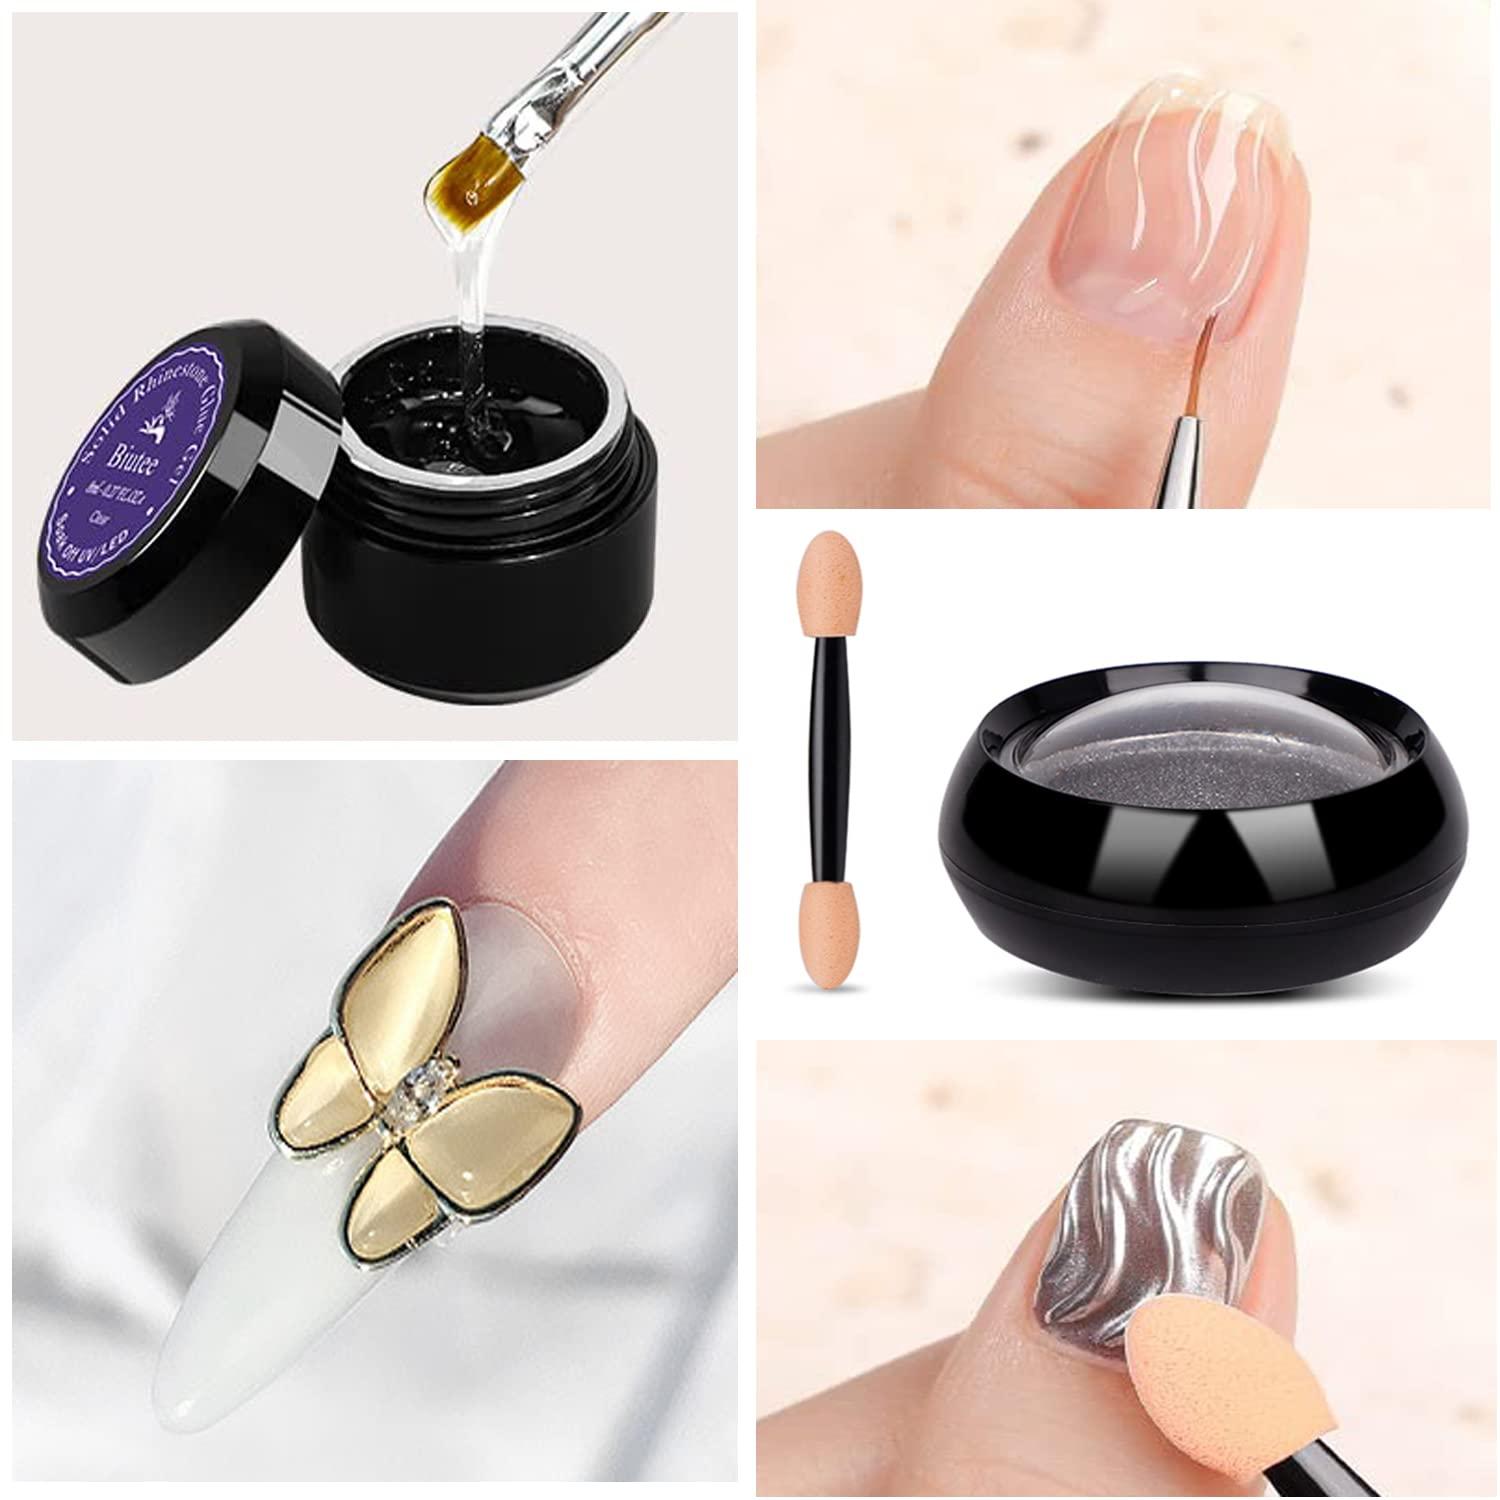 Nail Rhinestone Glue for Nails Art Glue for Rhinestones Gel Adhesive No  Wipe for Gem Stones Jewelry Charms with Nail Accessories (8ml+10ml)